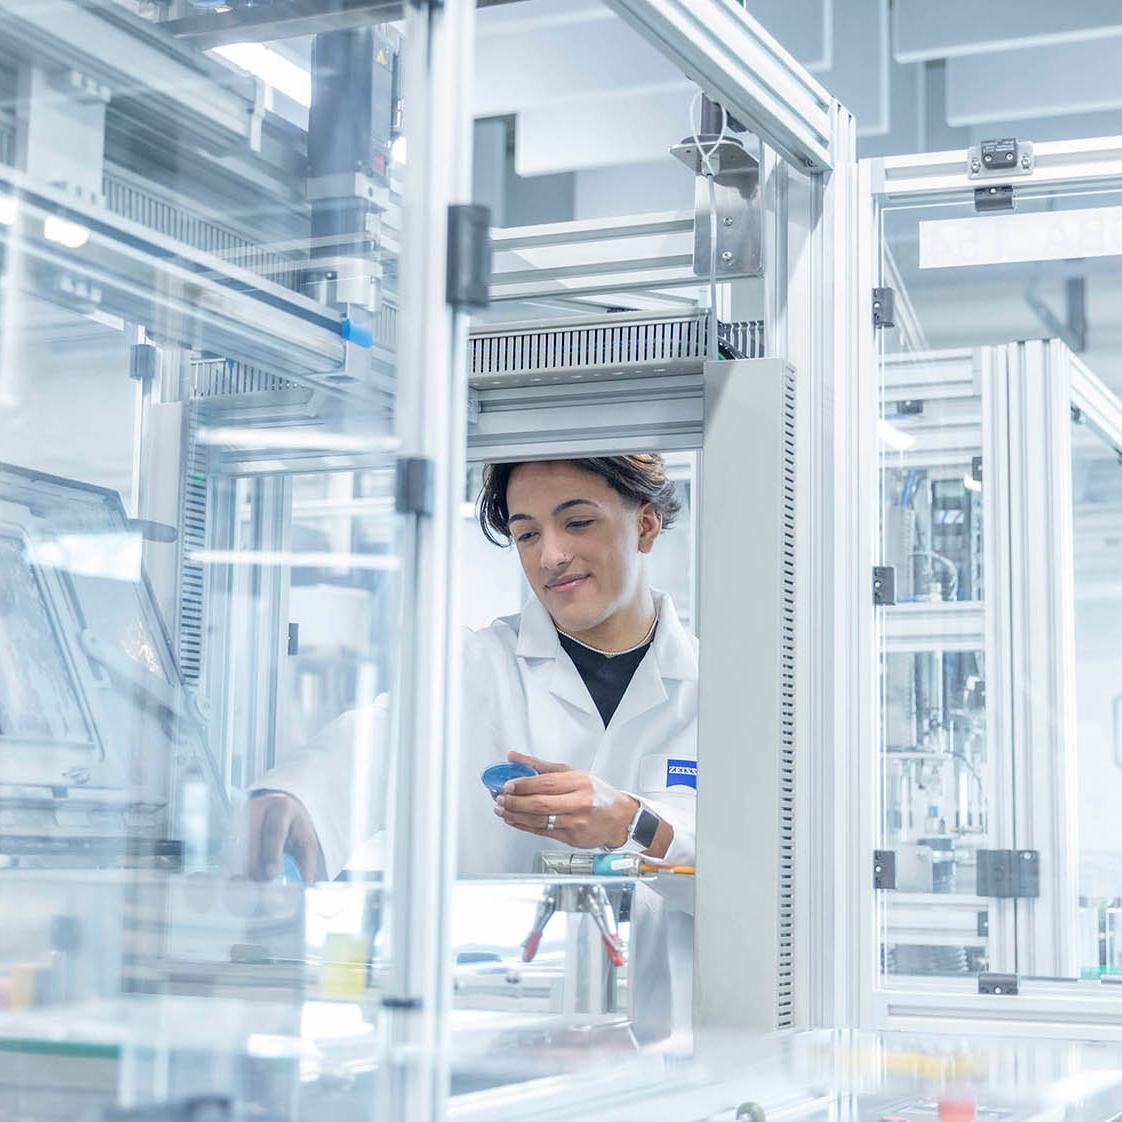 ZEISS technician working in Production and Manufacturing